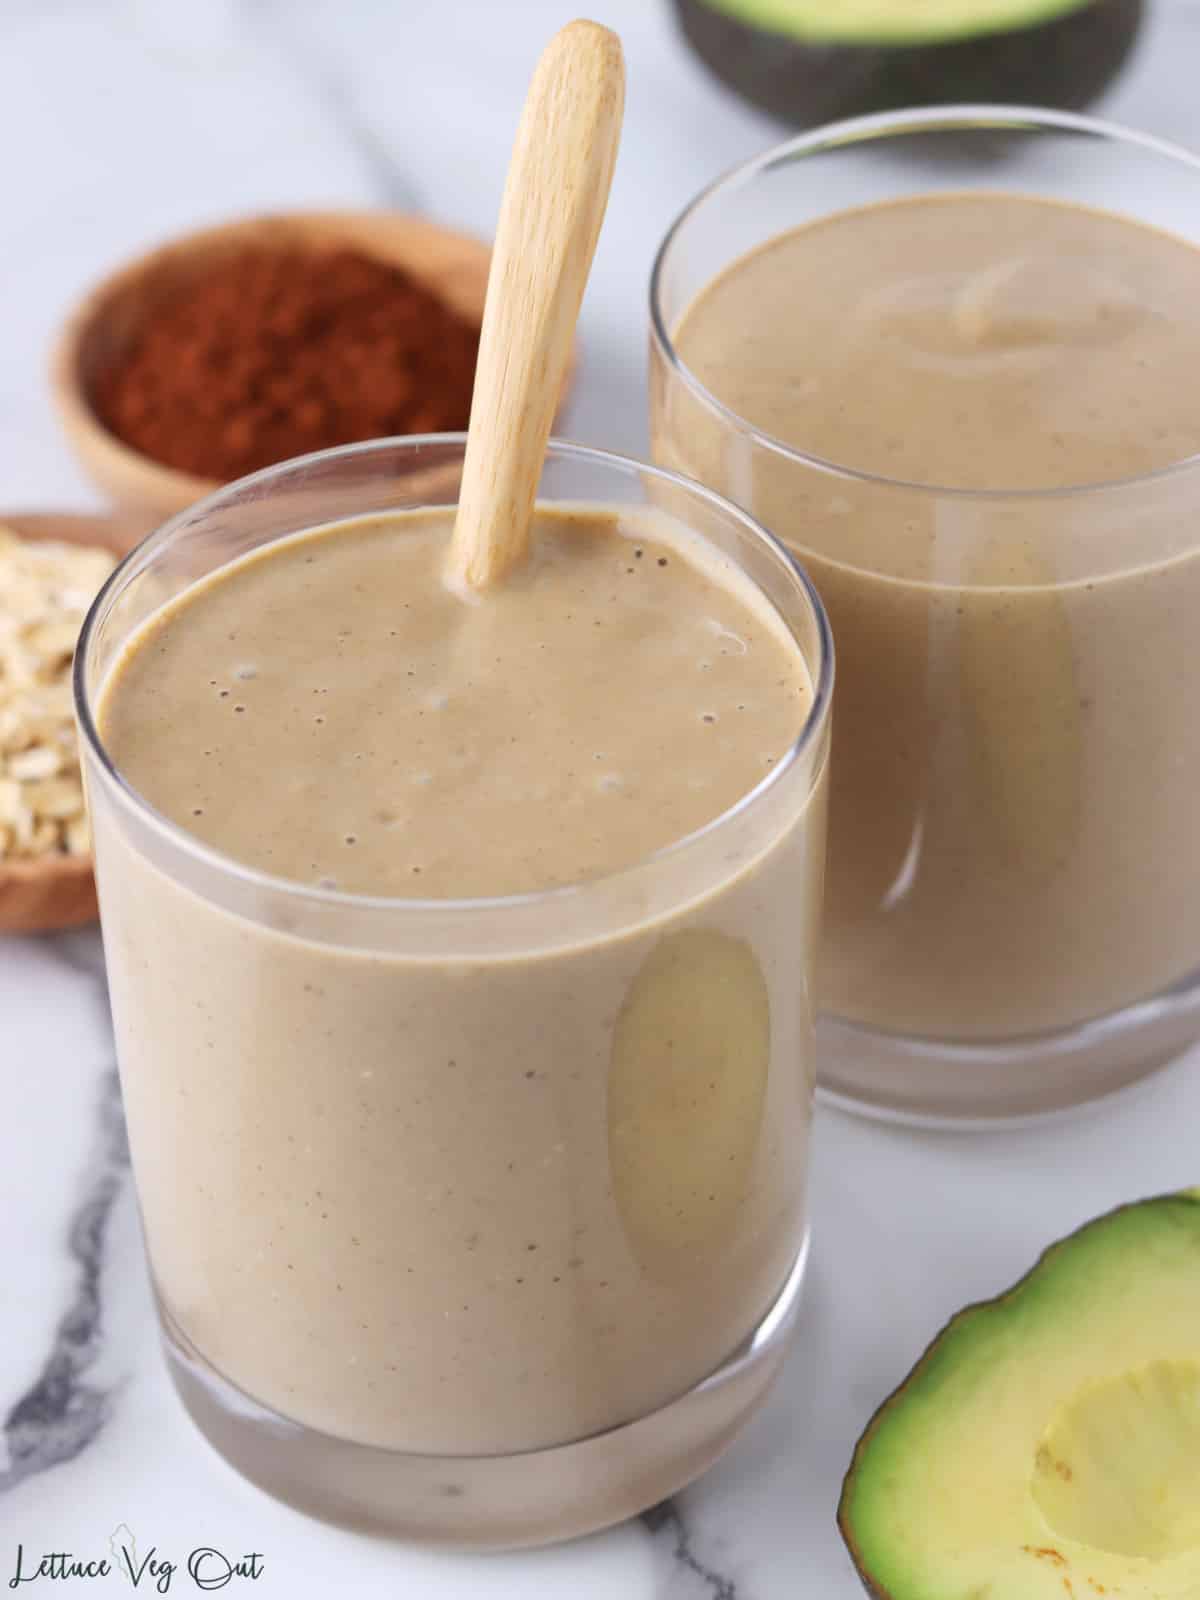 Two glasses of chocolate avocado oatmeal smoothie with avocado and small dish of cocoa powder around the glasses.